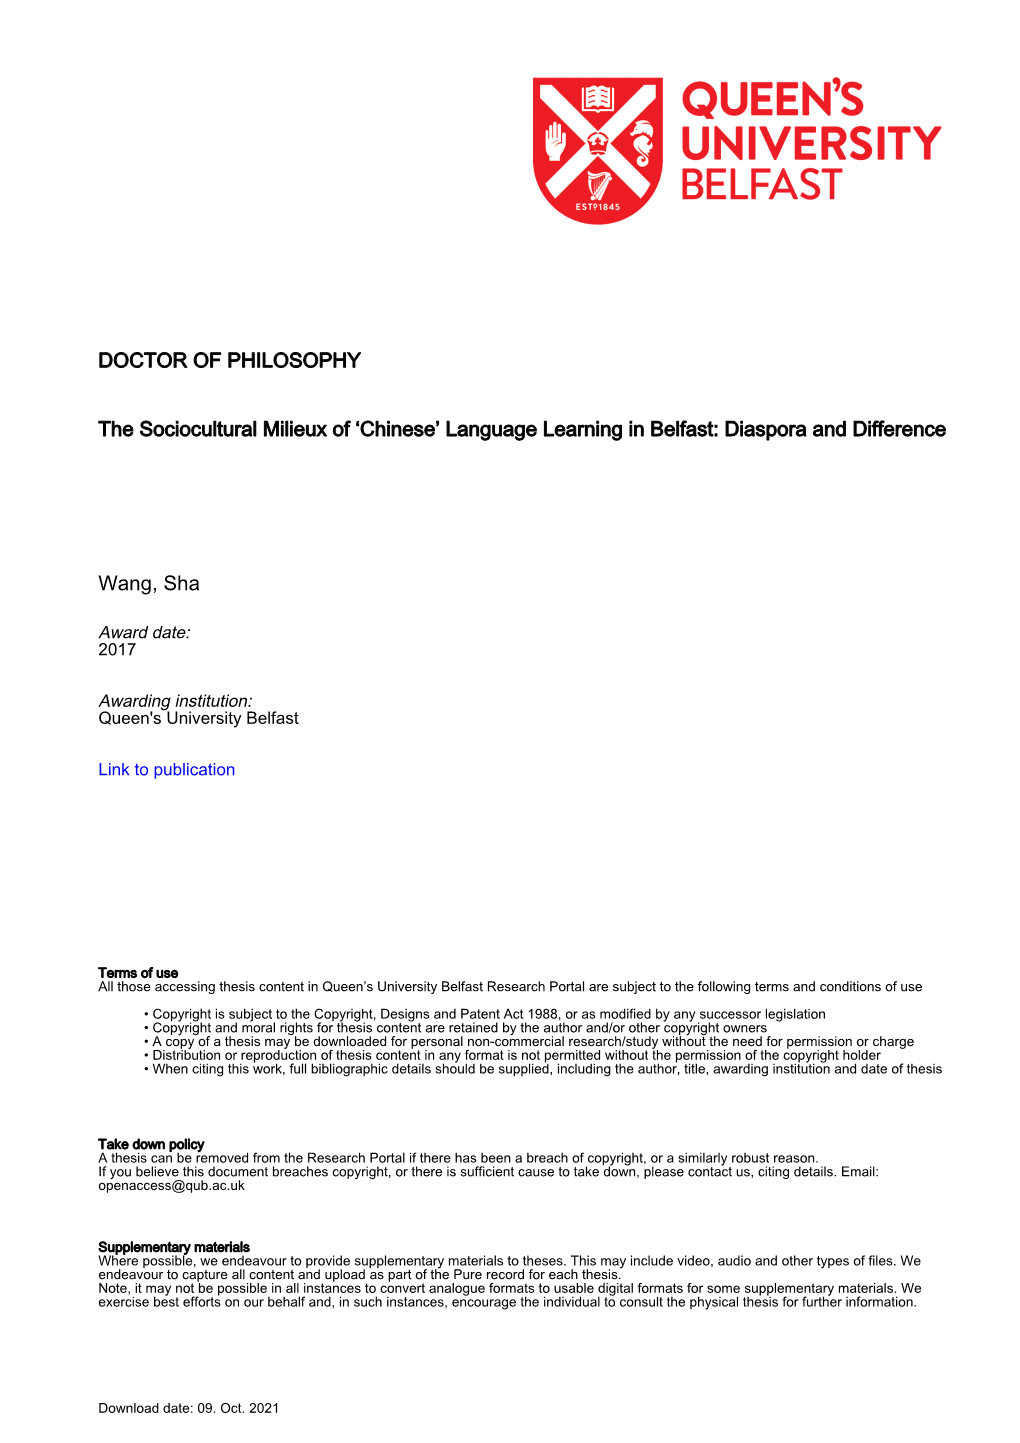 Chinese’ Language Learning in Belfast: Diaspora and Difference